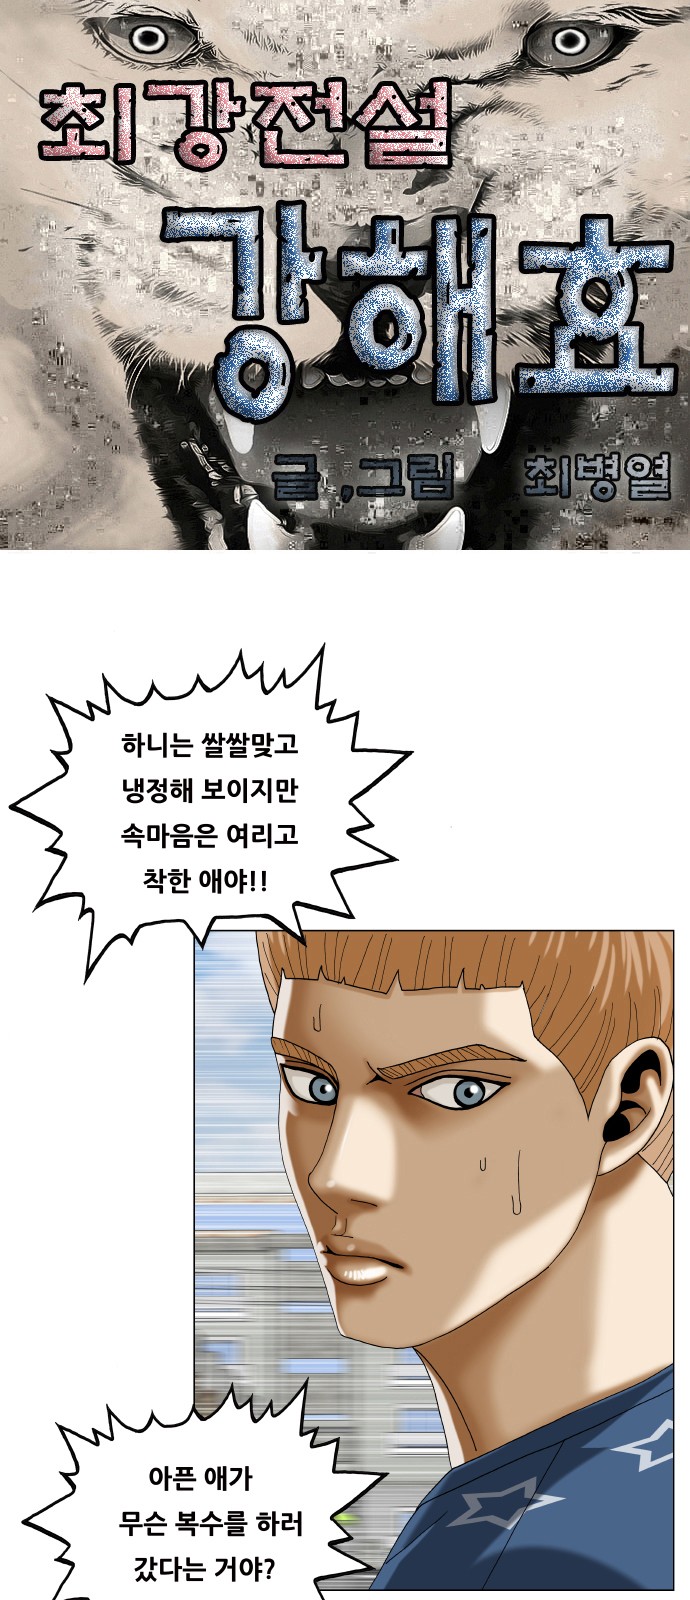 Ultimate Legend - Kang Hae Hyo - Chapter 456 - Page 1